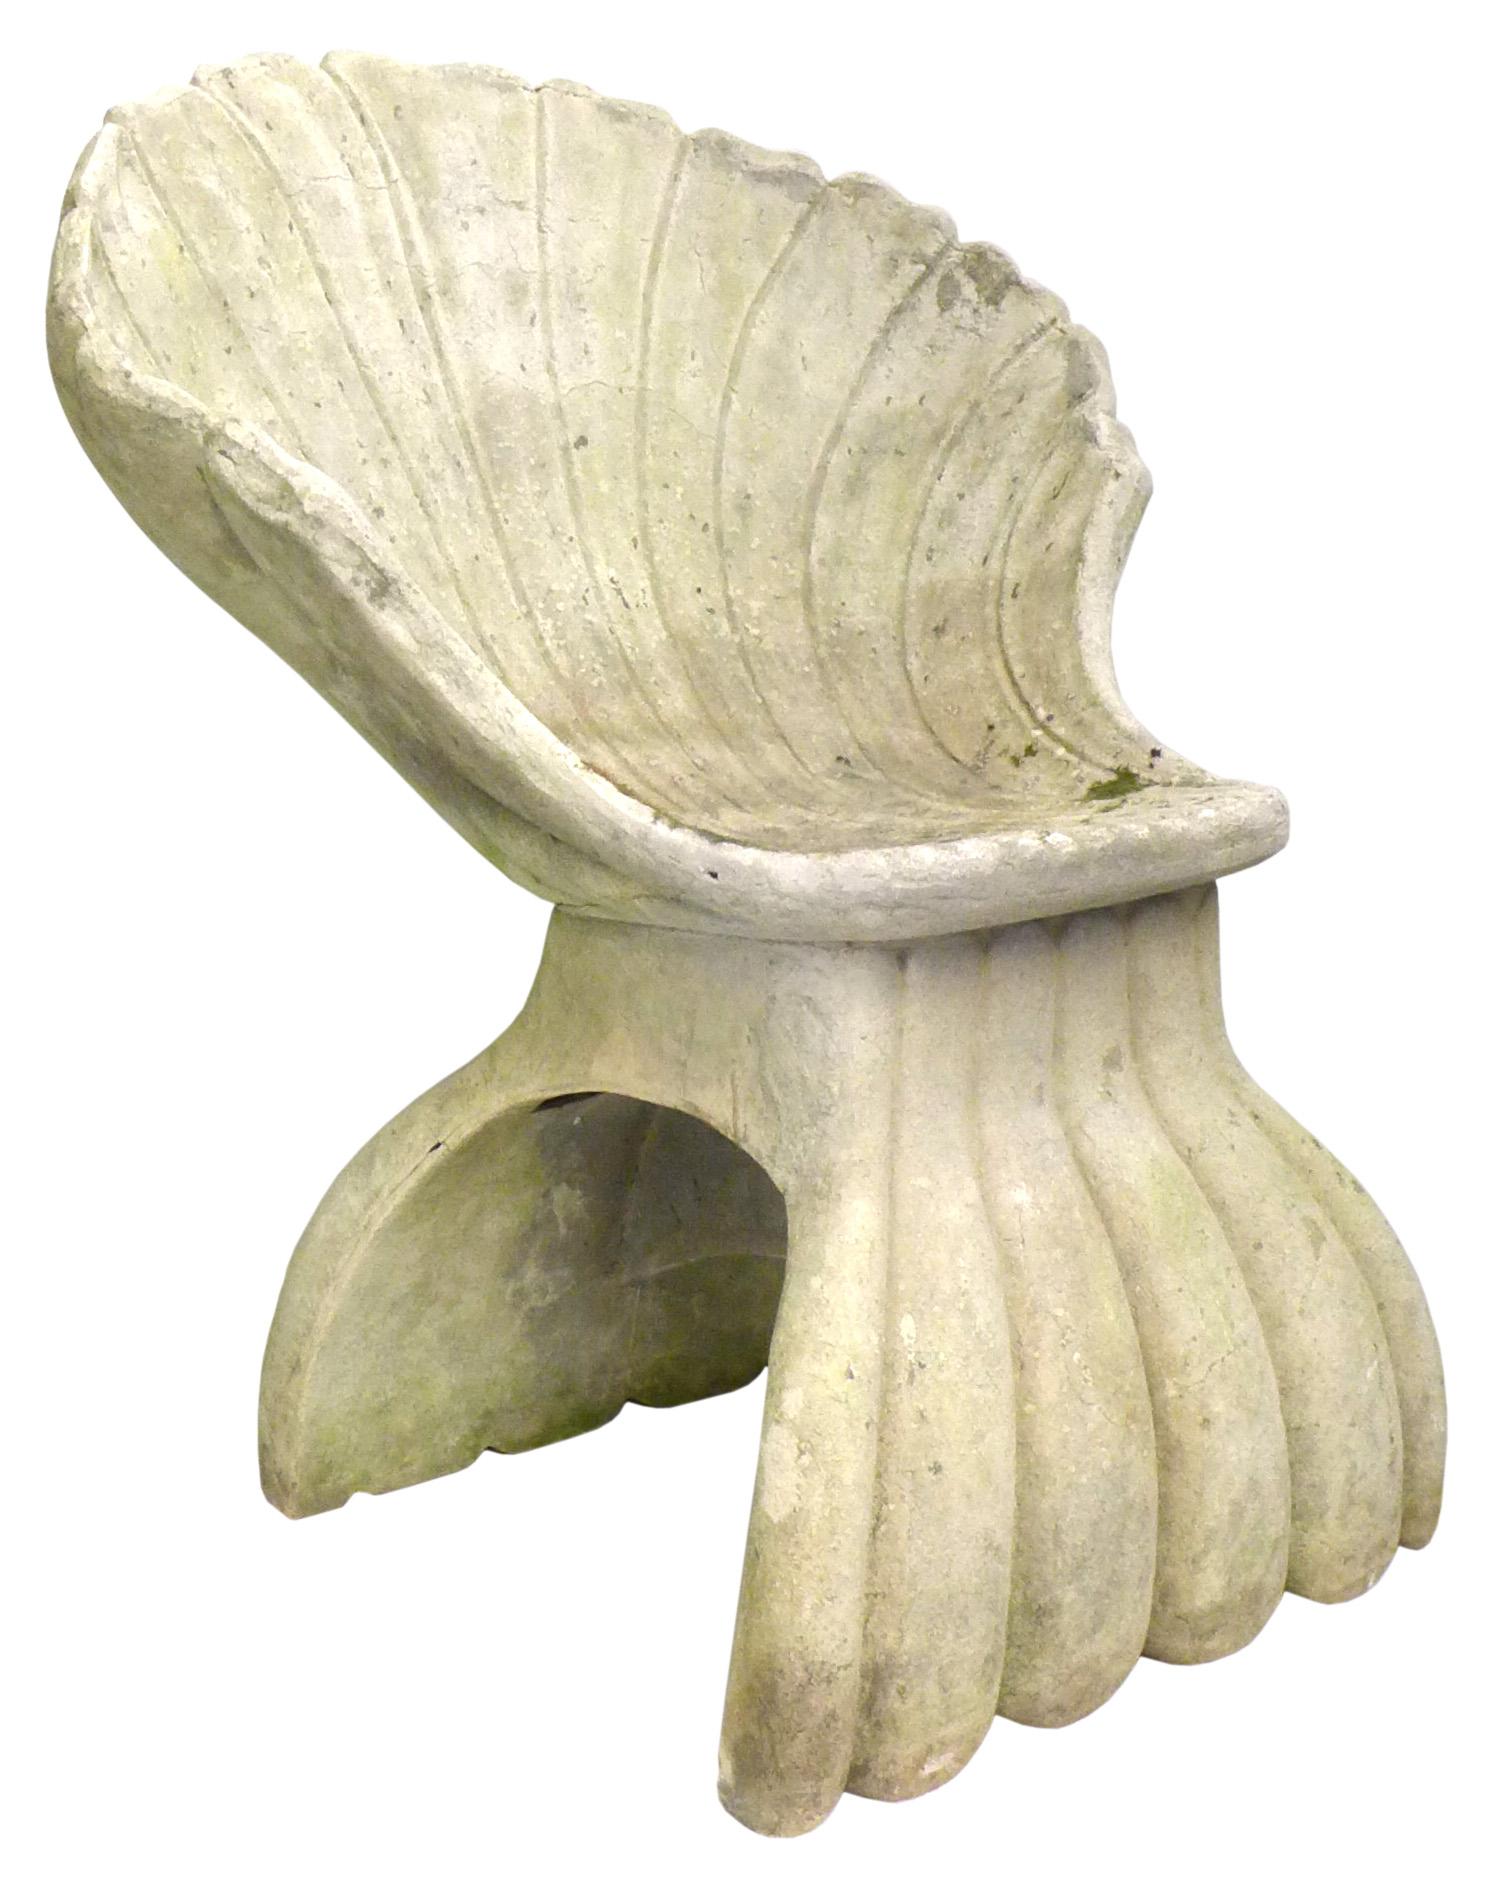 A fantastic, faux-concrete, cast fiberglass shell chair. A wonderful take on the classic Italian grotto chair, joined fiberglass forms glazed with concrete. Great patina from age and some life outdoors. An alluring form in an unexpected material; a